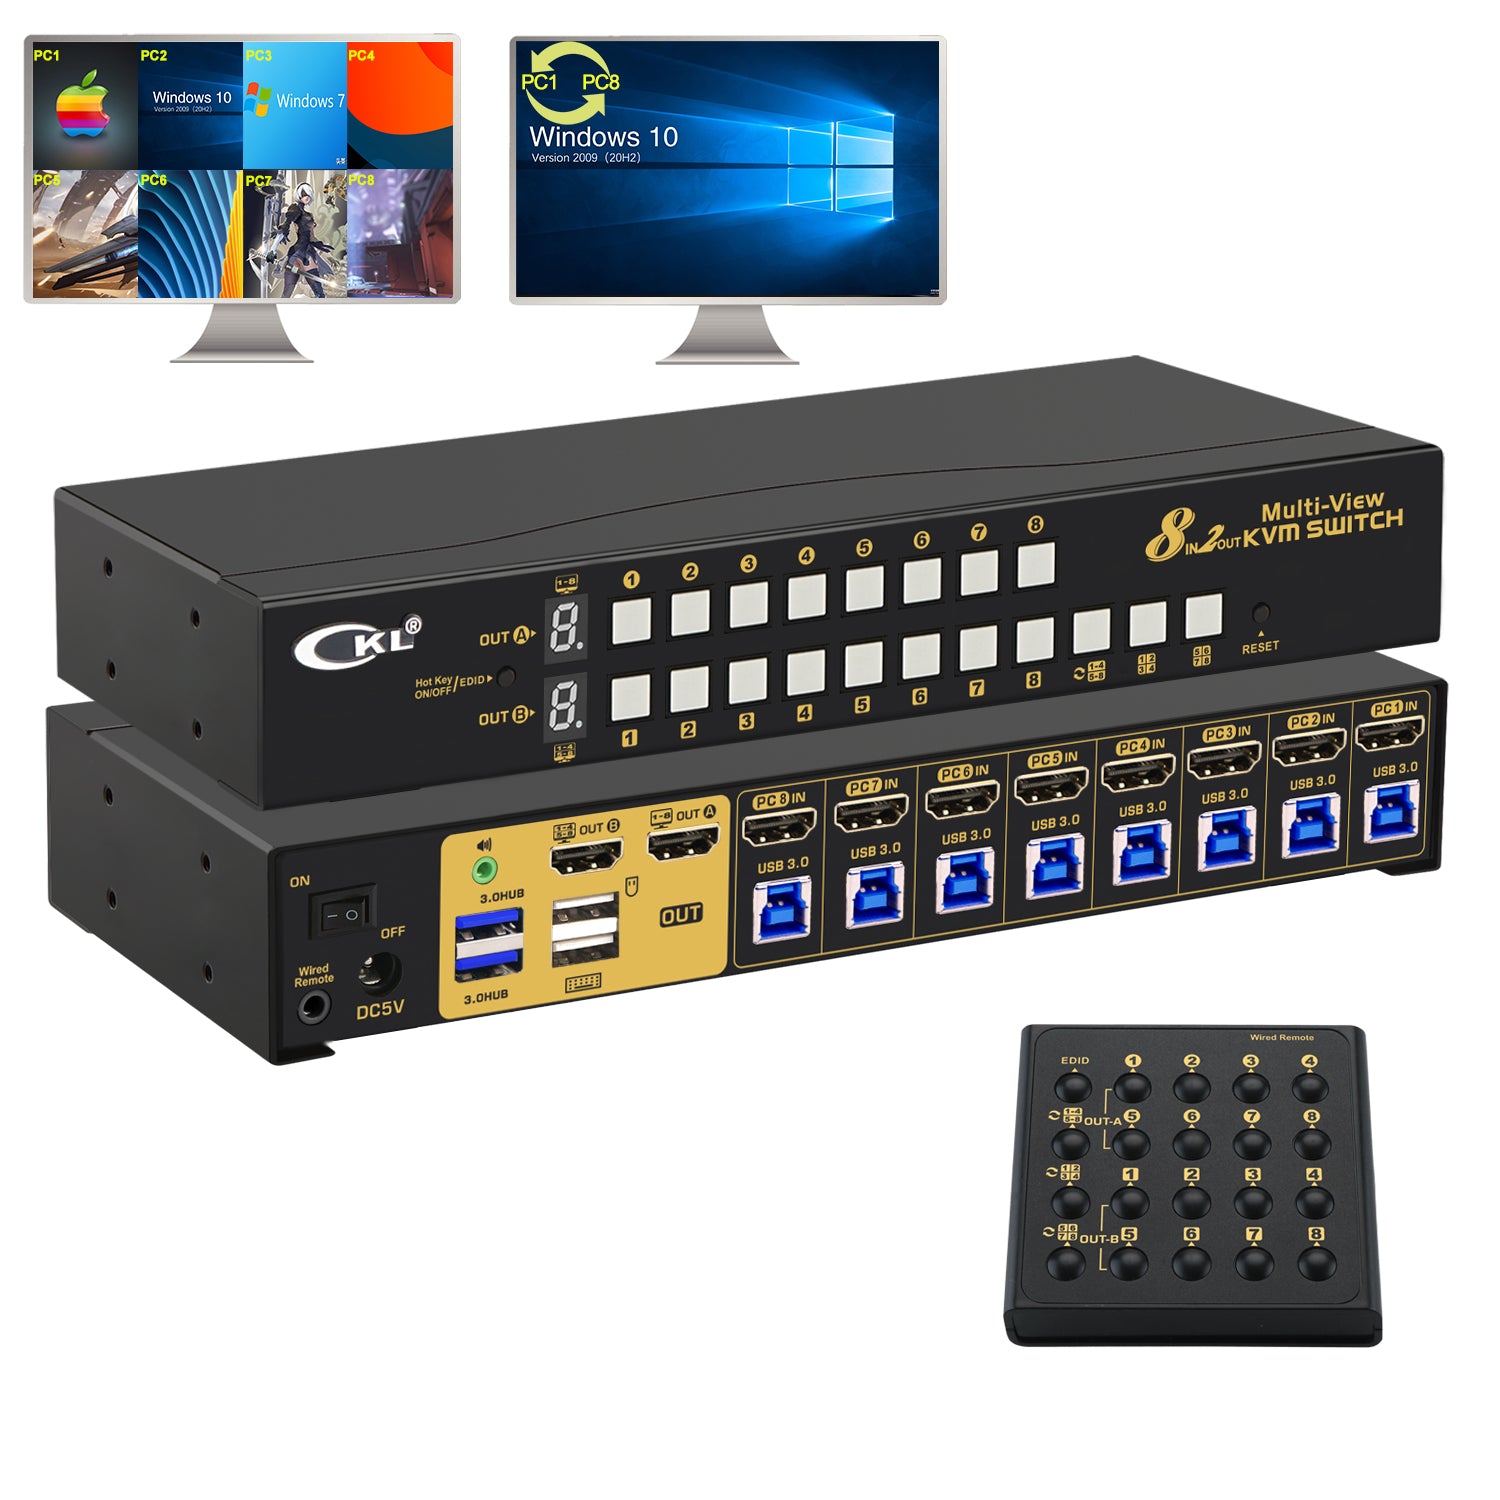 CKL 8 Port Multi-view KVM Switch Dual Monitor 4K@30Hz, Supports 1 Multi-vewer and 1 Single View Display, Hotkey and Wired Remote (82MVKVM)